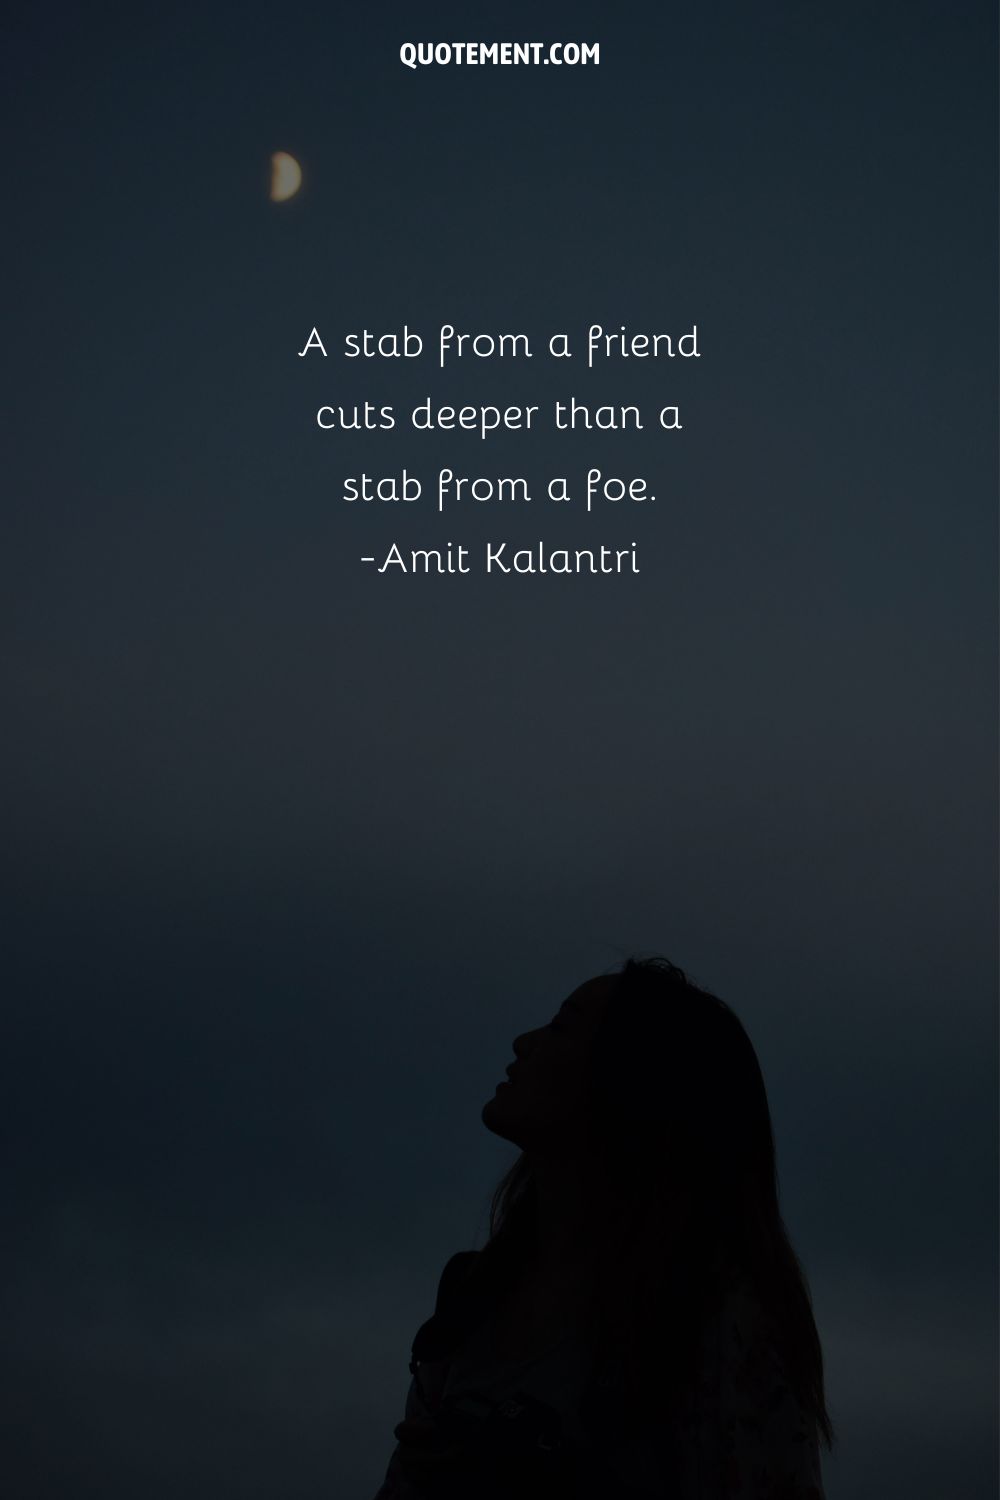 A stab from a friend cuts deeper than a stab from a foe